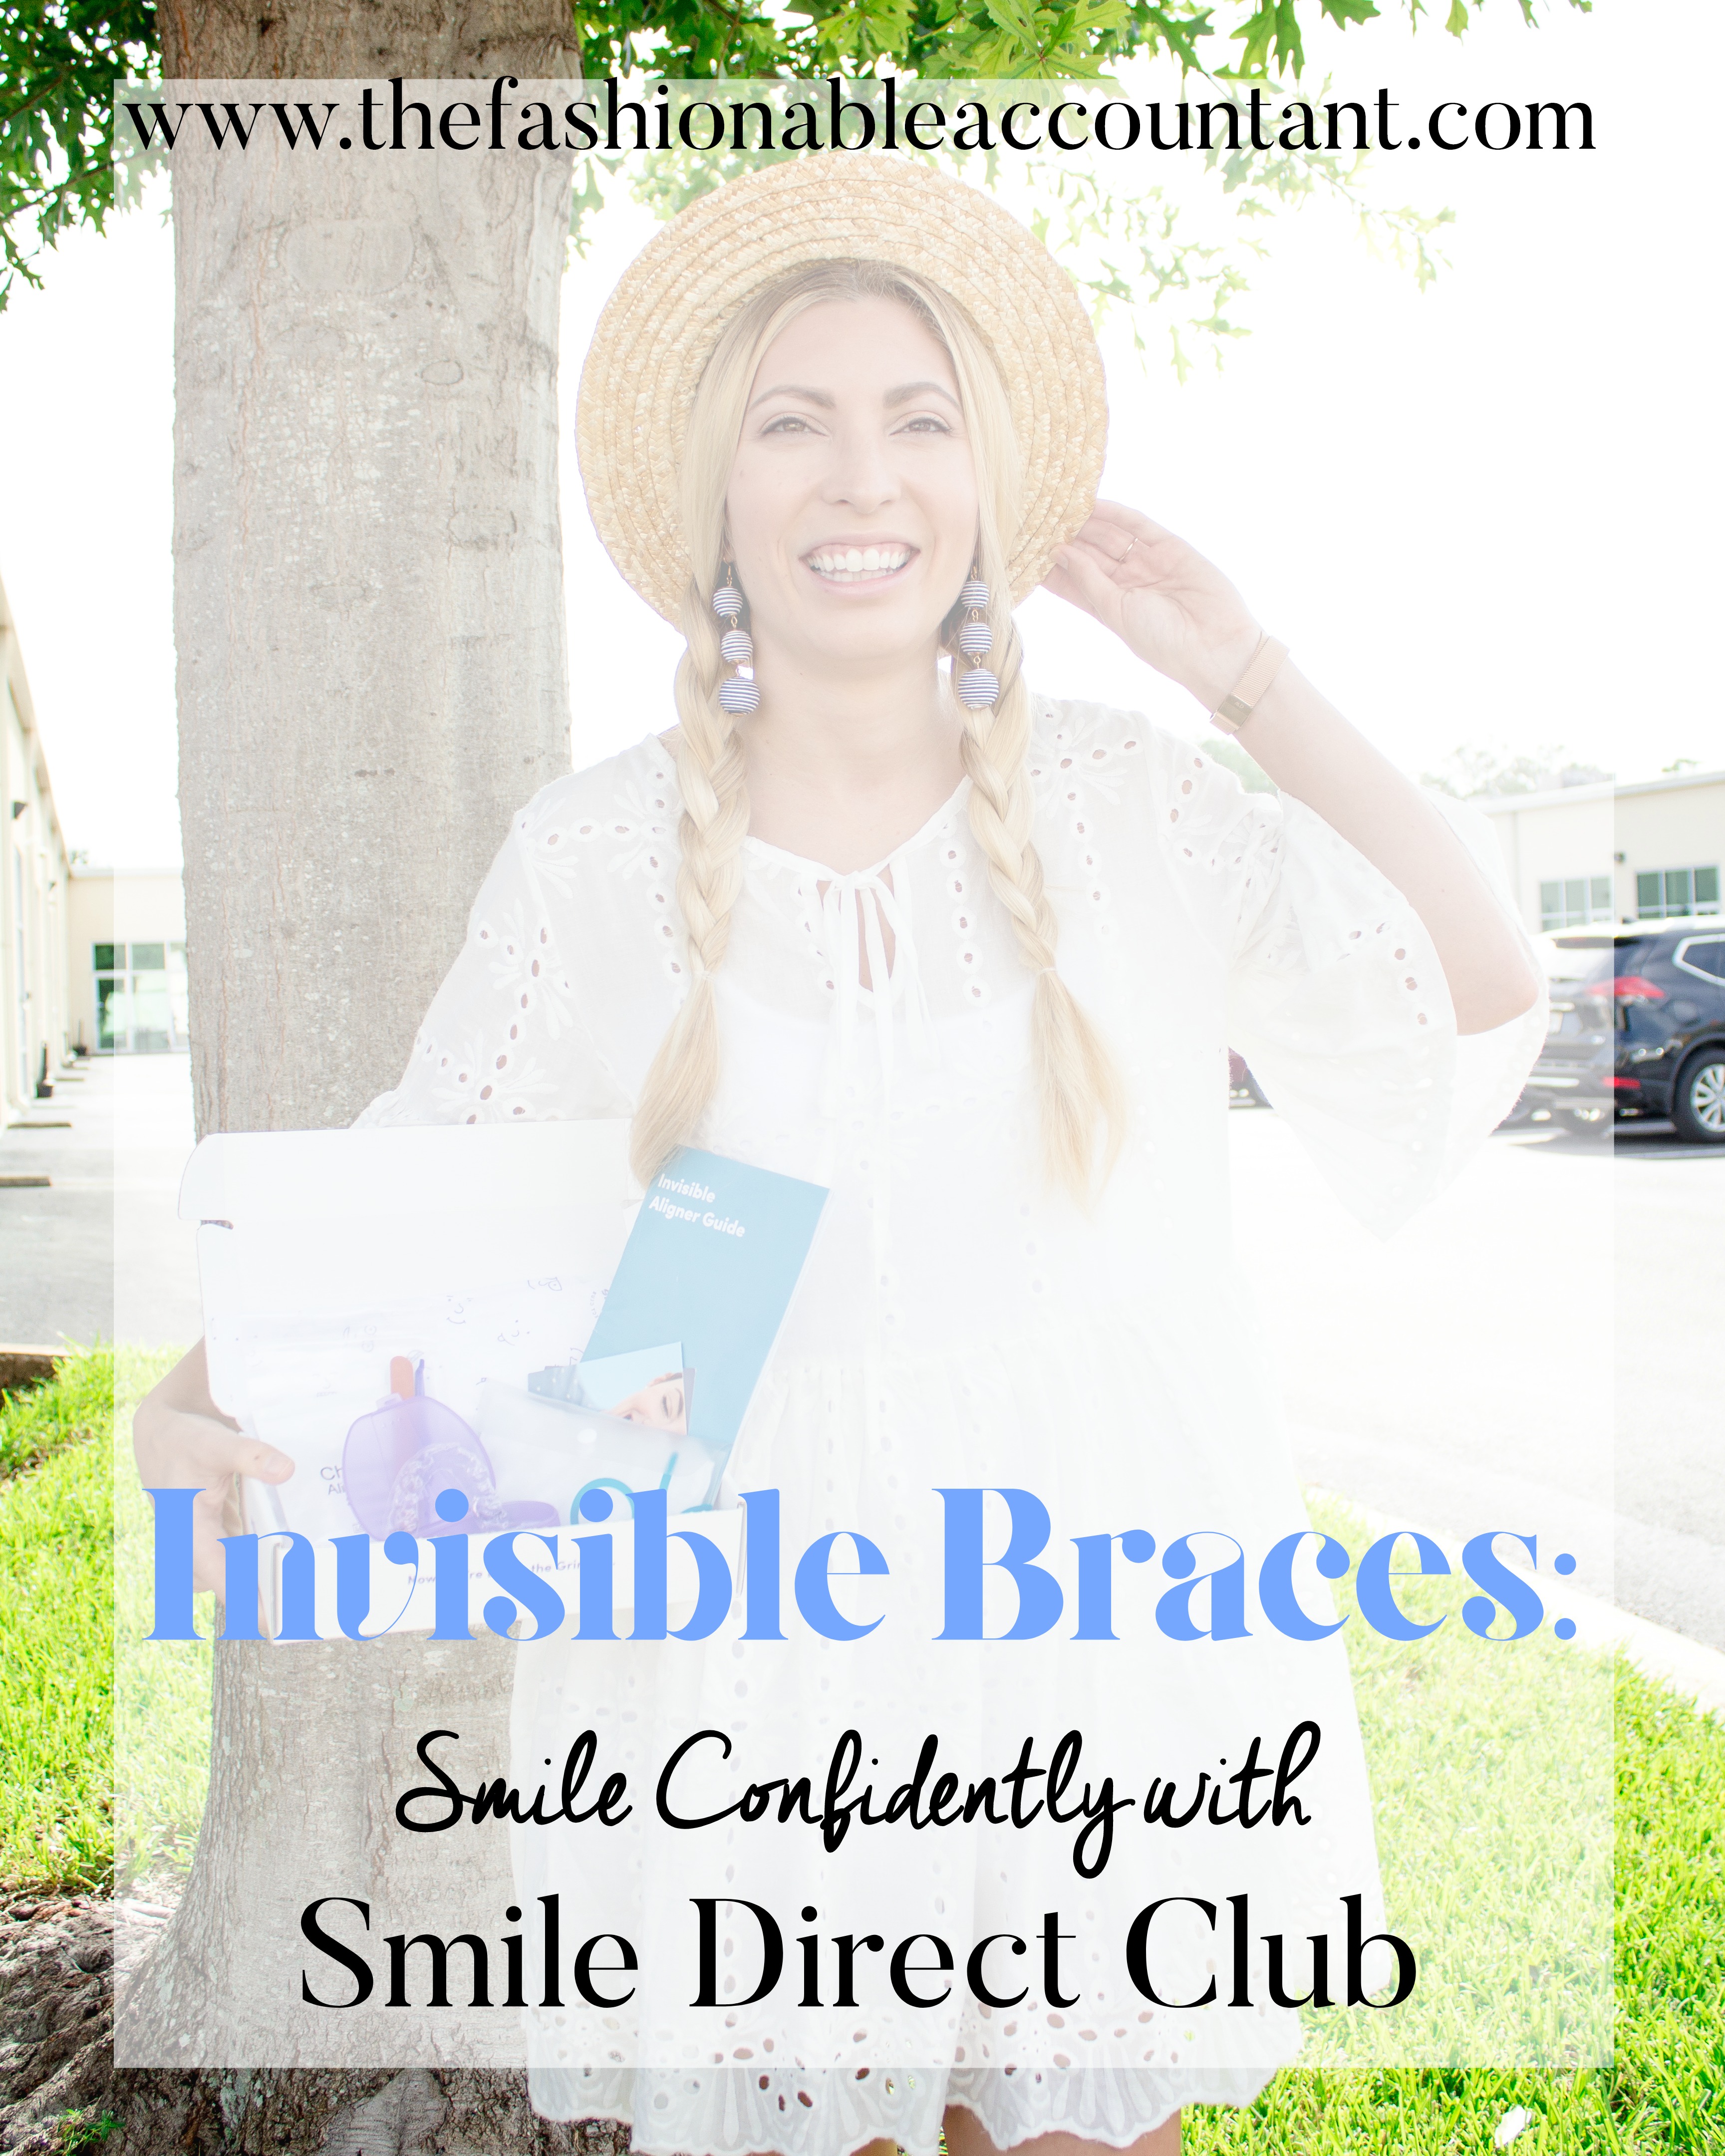 INVISIBLE BRACES: SMILE CONFIDENTLY WITH SMILE DIRECT CLUB